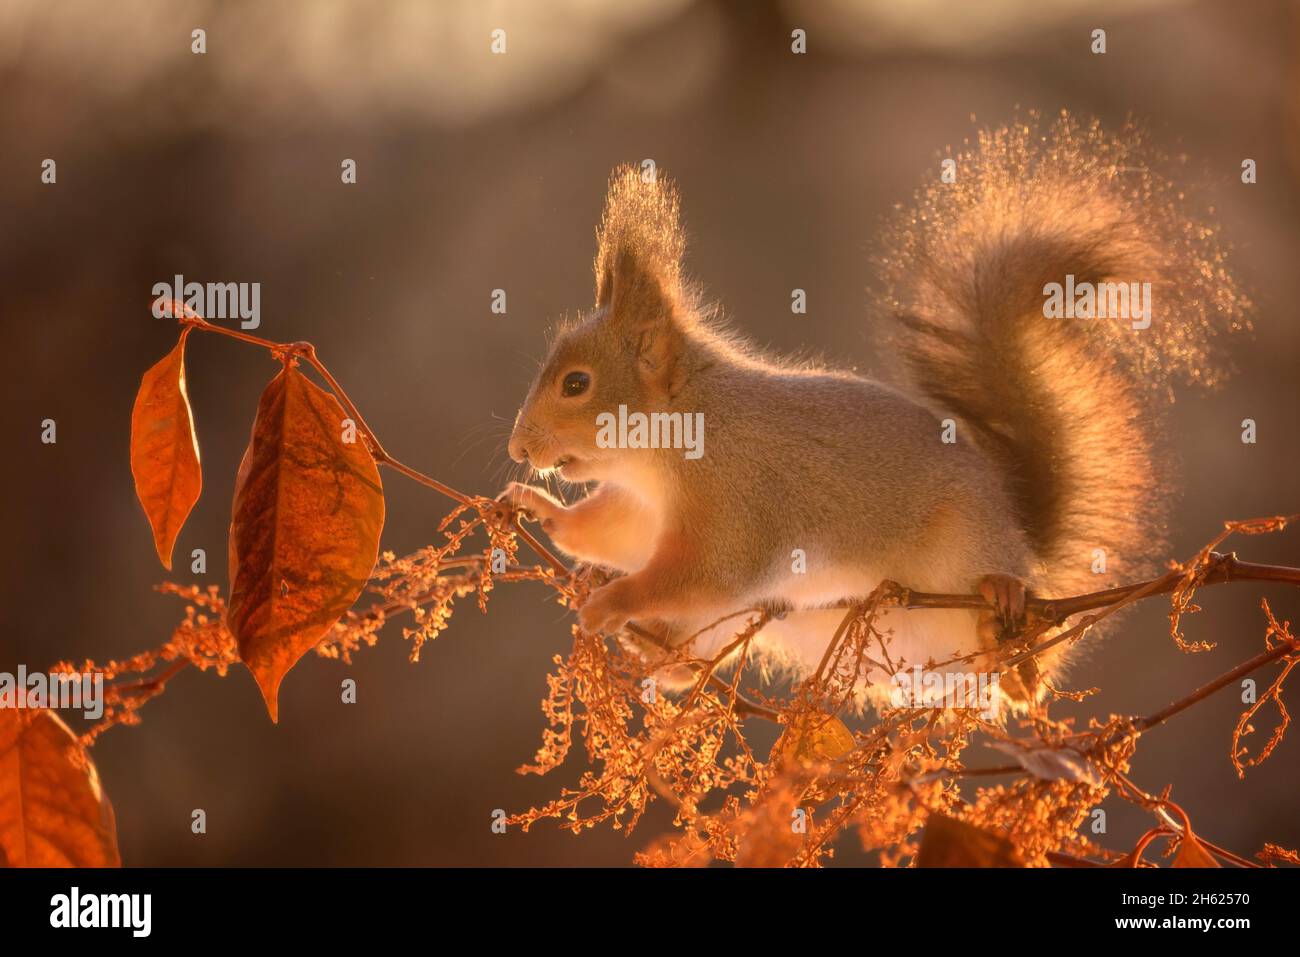 red squirrel is standing on branches in sunlight Stock Photo